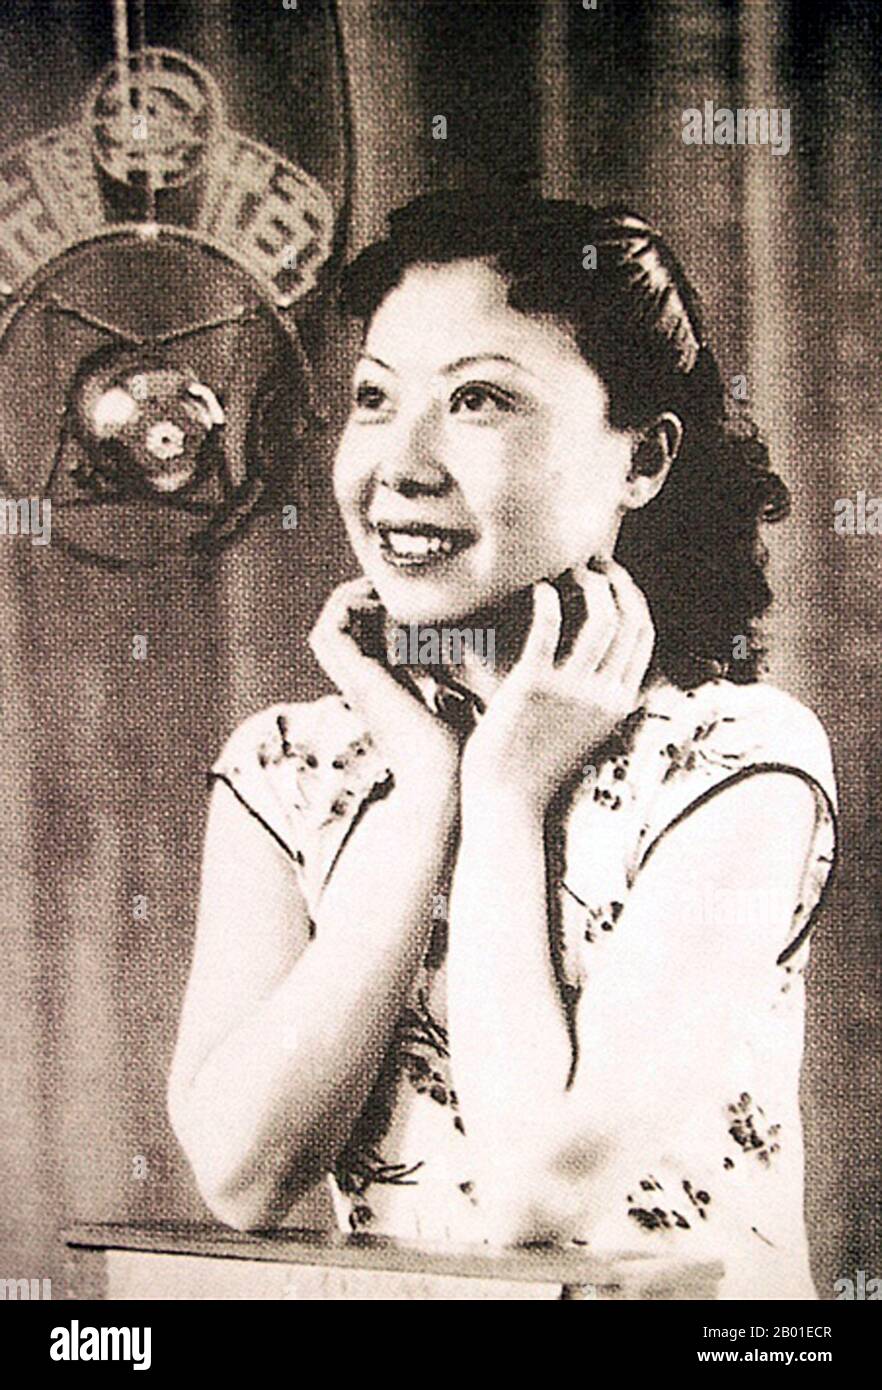 China: Bai Hong (24 February 1920 - 28 May 1992), movie star and singer, c. 1940s.  Bai Hong was born with the birth name Bai Lizhu (白丽珠) in Beijing. By the 1940s, she became one of China's 'seven great singing stars'  At a young age Bai joined the Bright Moonlight Song and Dance Troupe, where she entered the Shanghai entertainment industry. She used the stage name (白虹), which translates as 'White Rainbow'.  By the 1930s, she was a popular icon, known for her mastery of language and clarity in expressing lyrics, which helped her gain many fans. Stock Photo